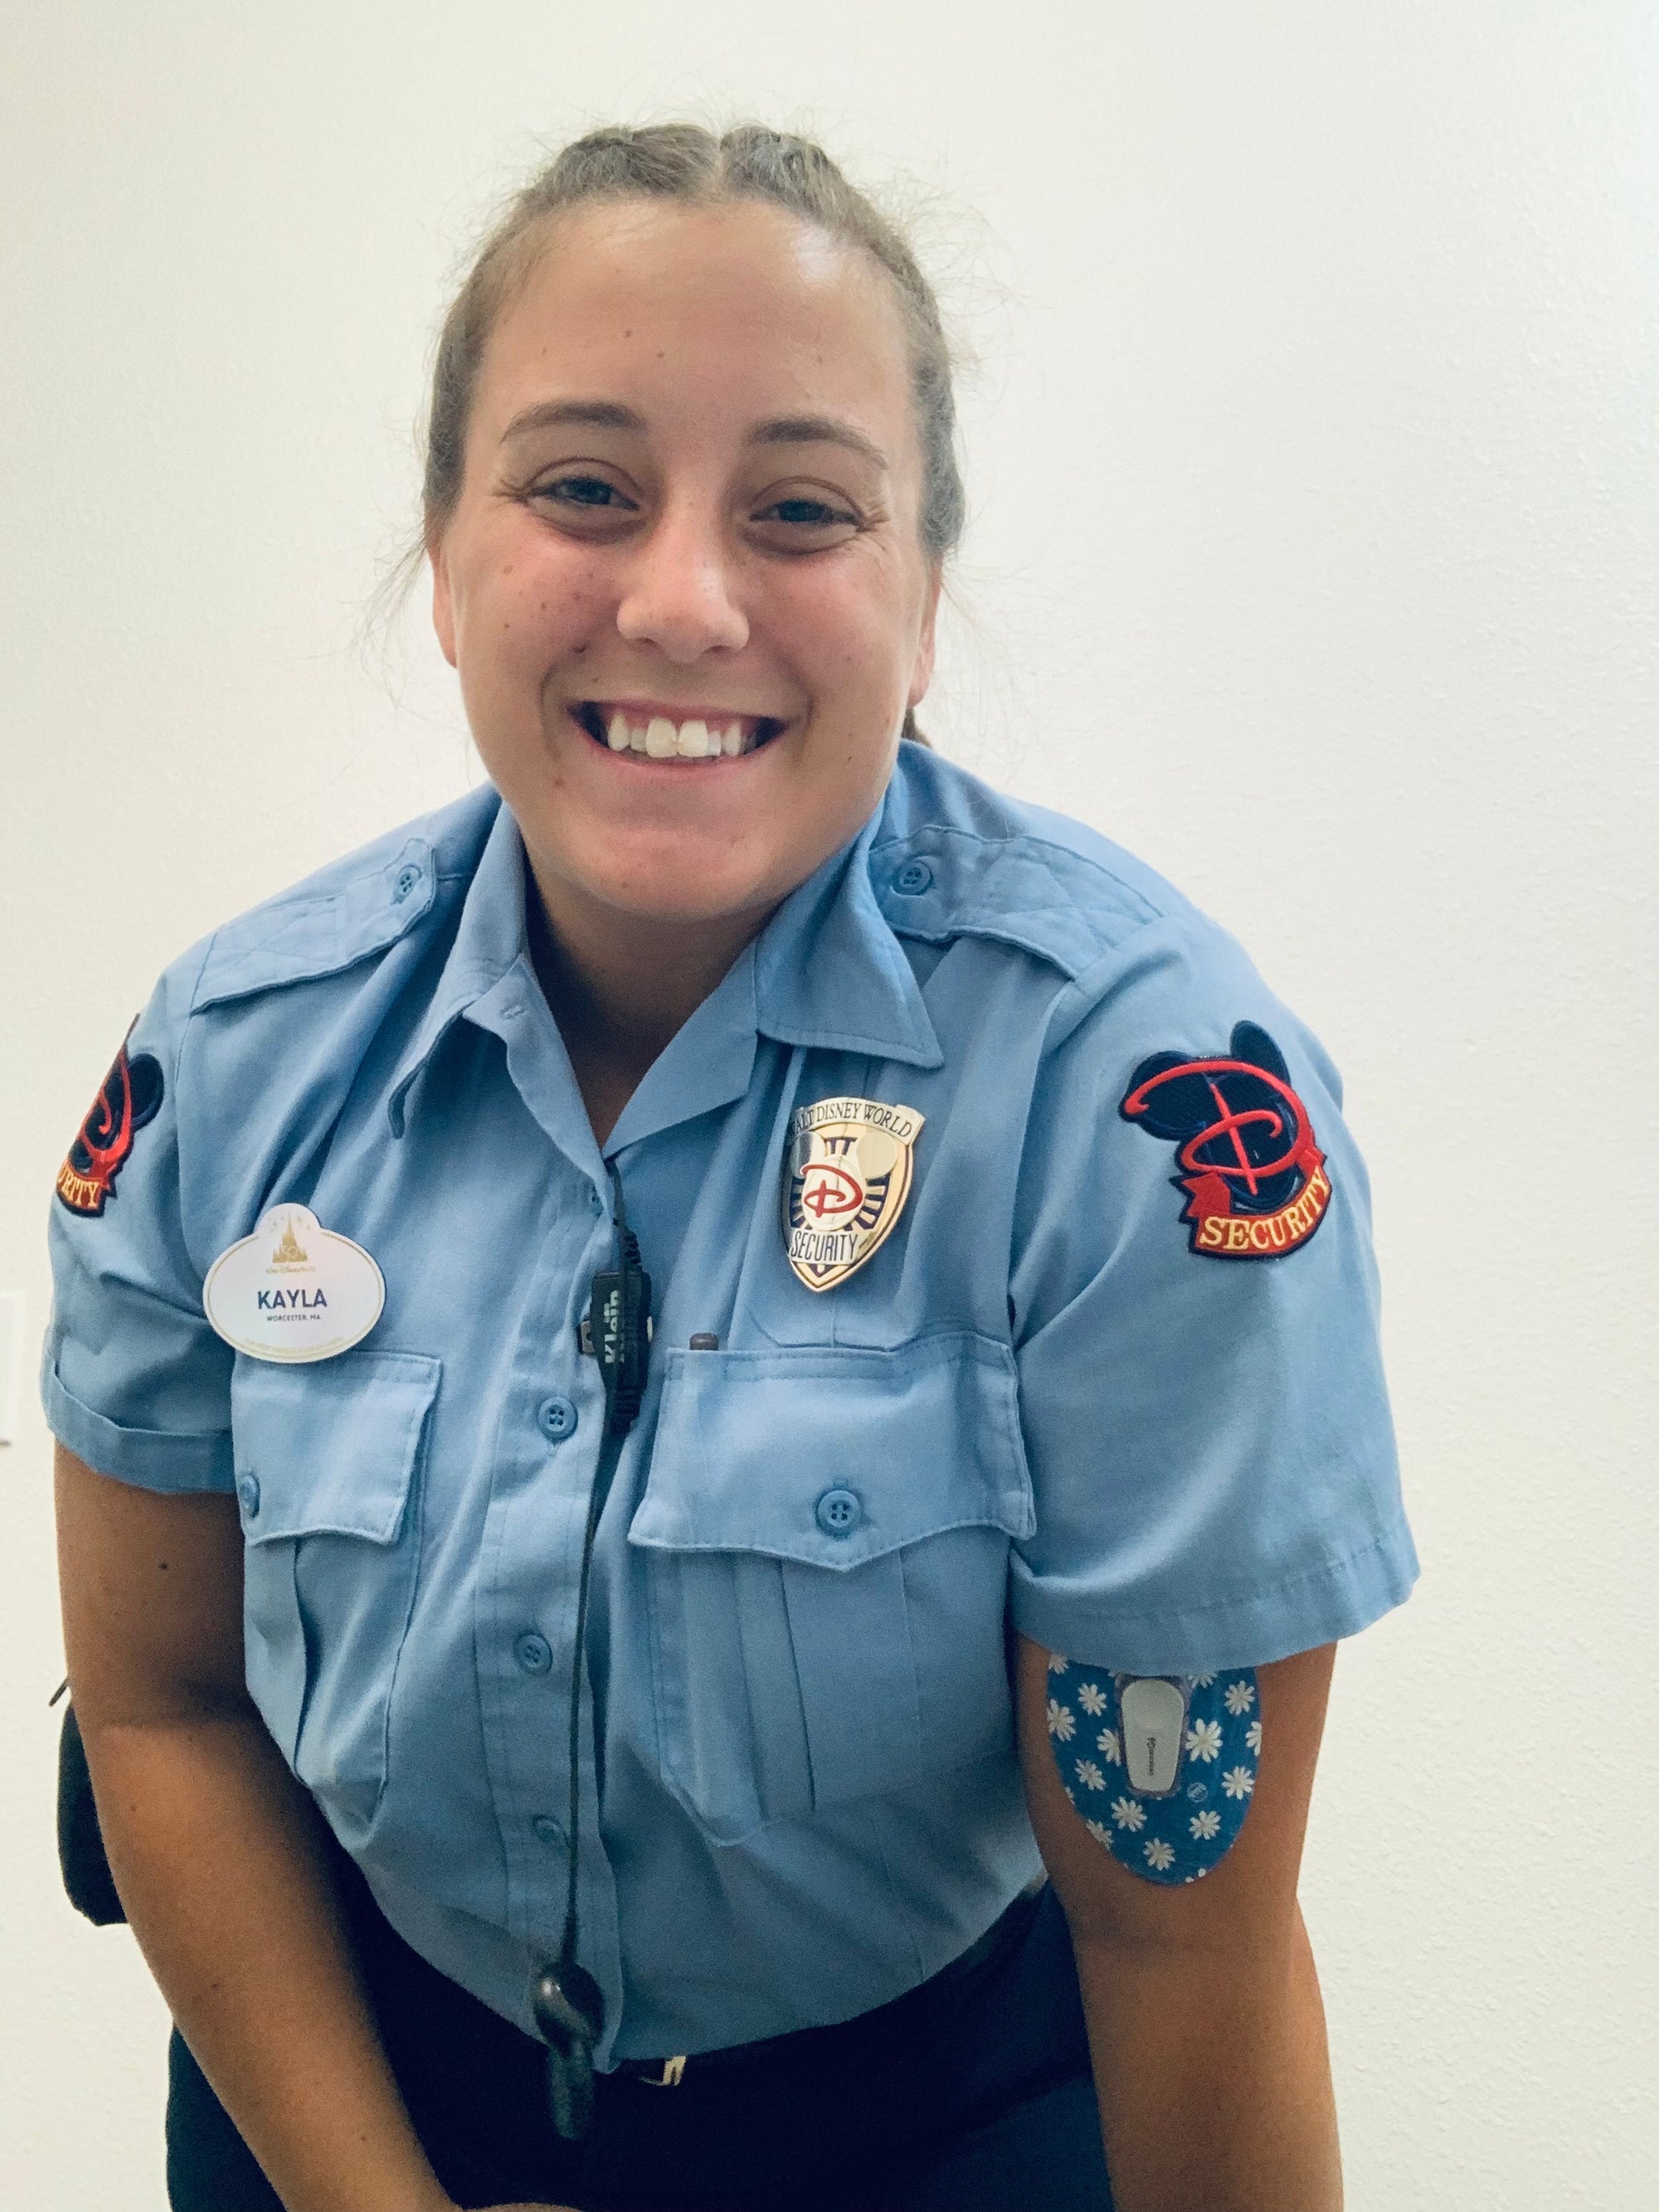 ExpressionMed Woman in Disney Security uniform with Painted Daisies Dexcom G6 Tape on arm